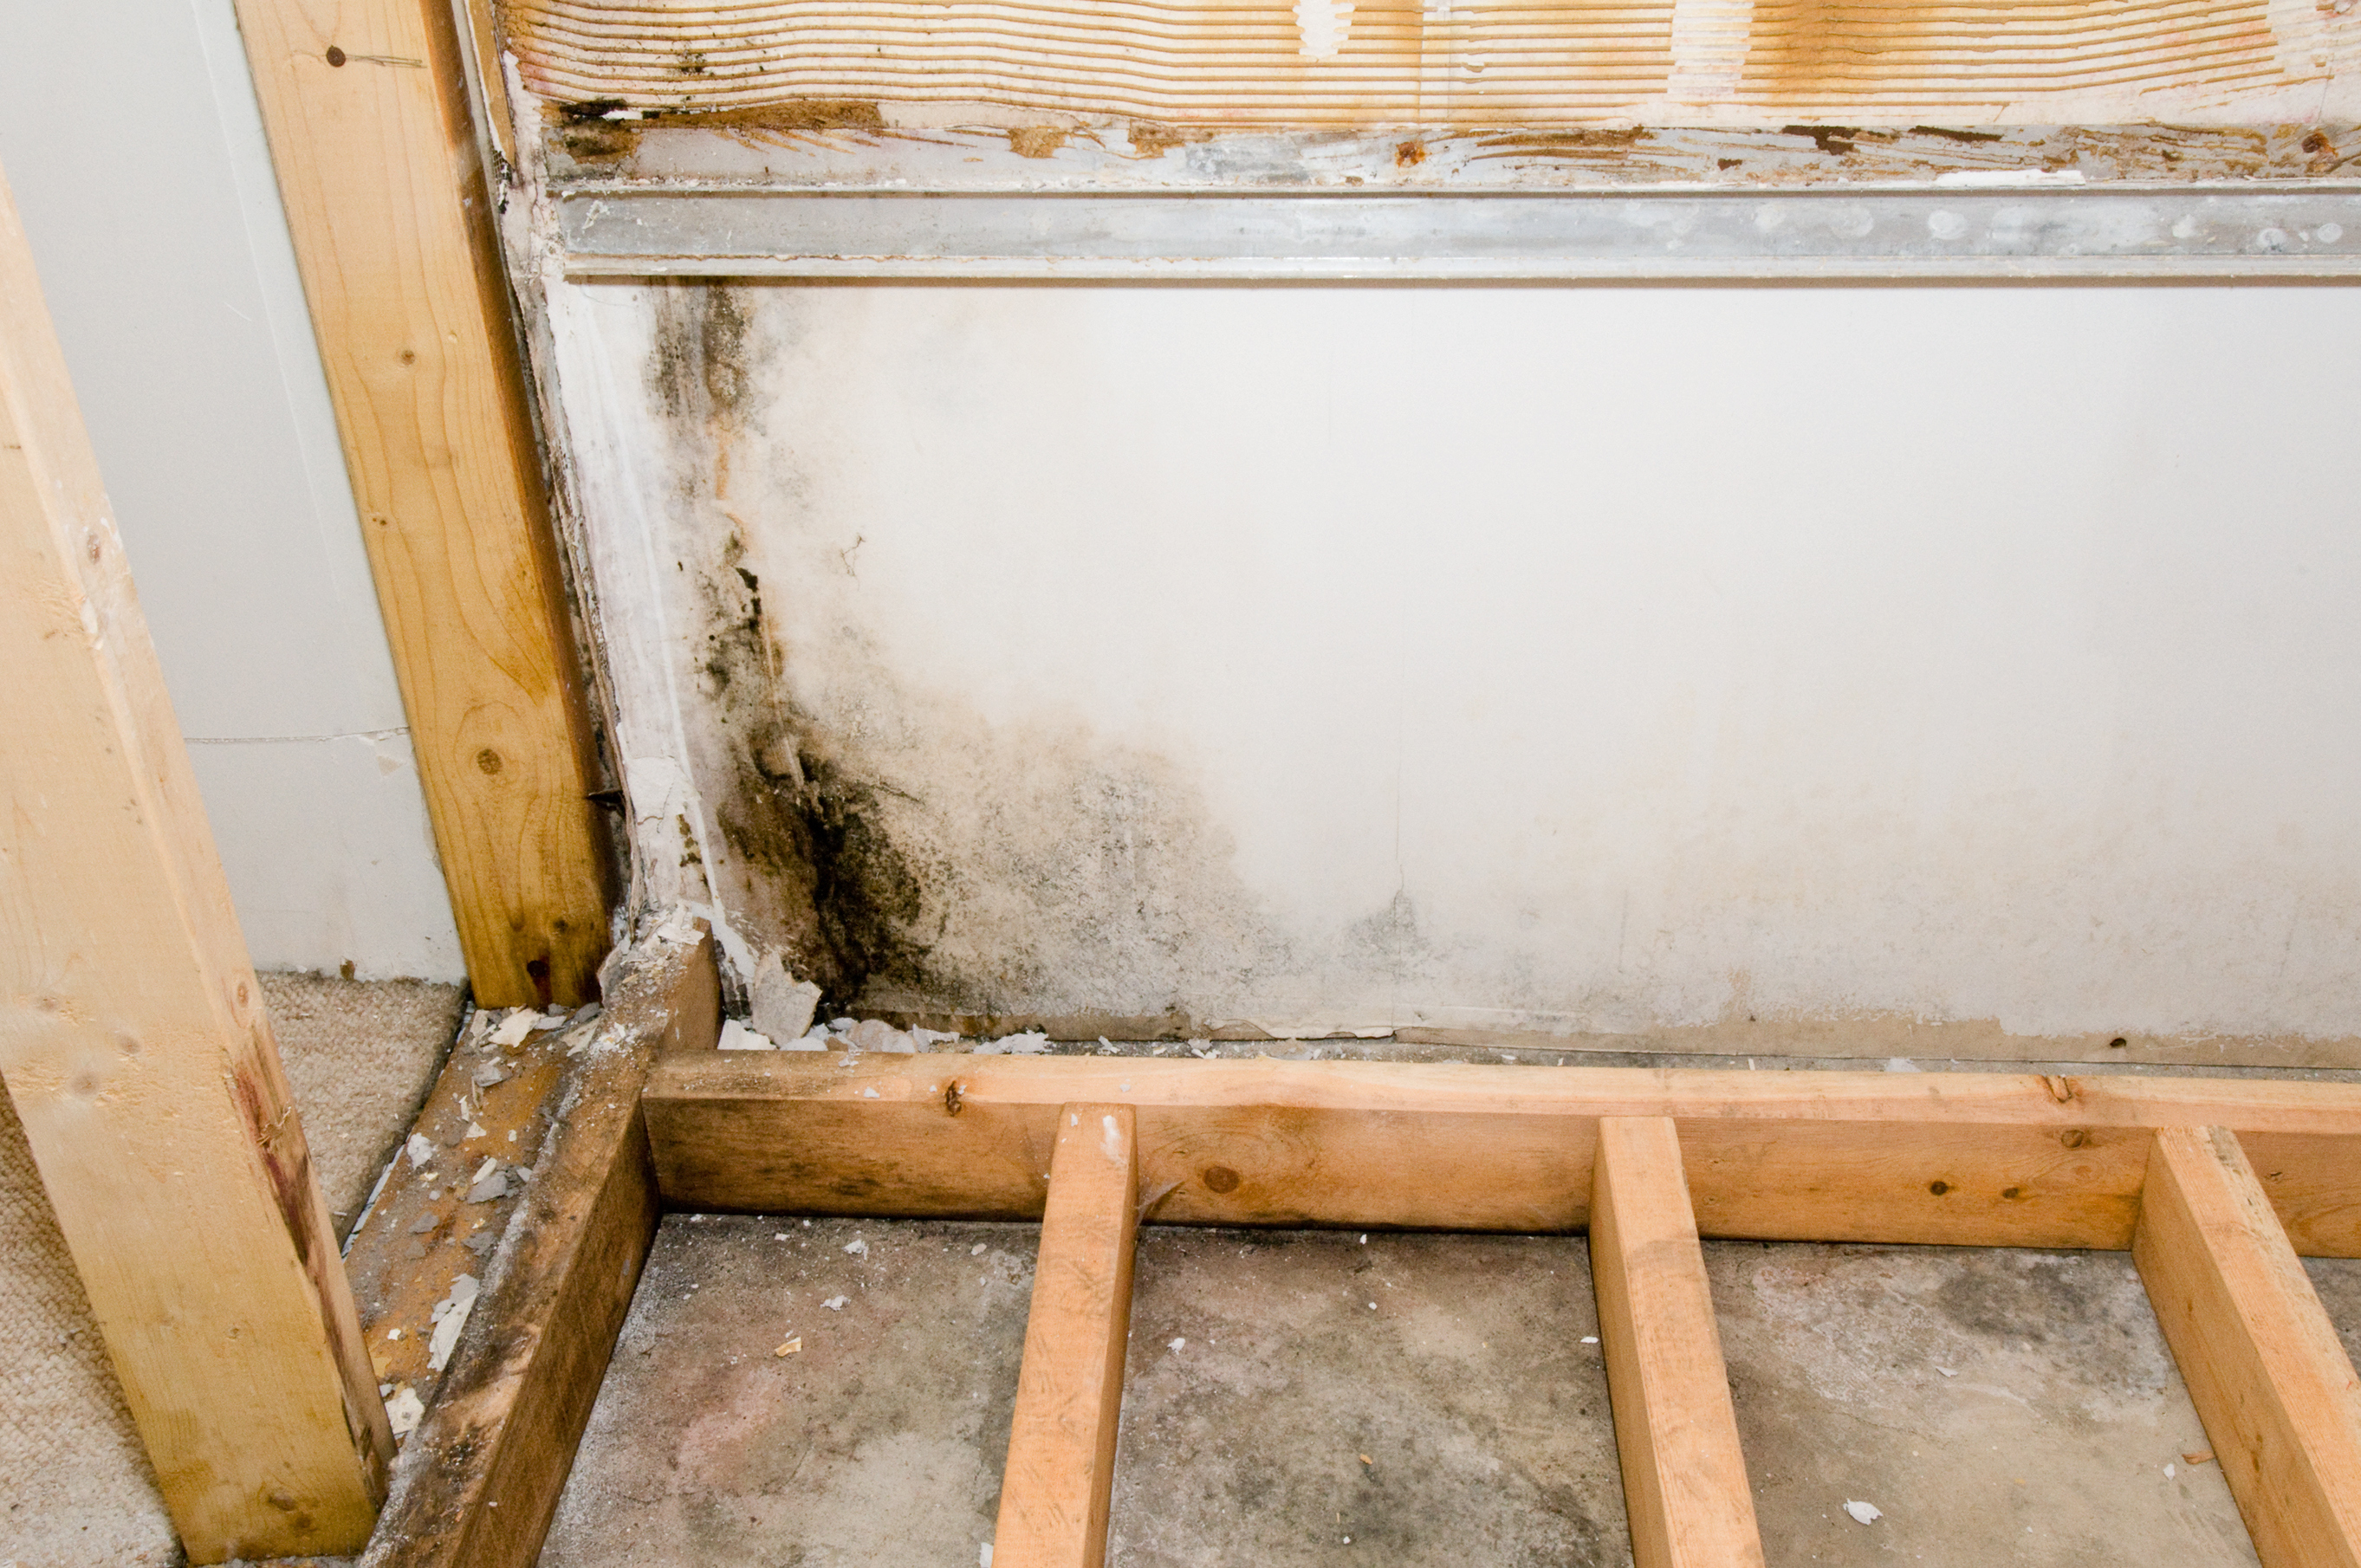 Mold on the bottom corner of a frame, next to wood framing